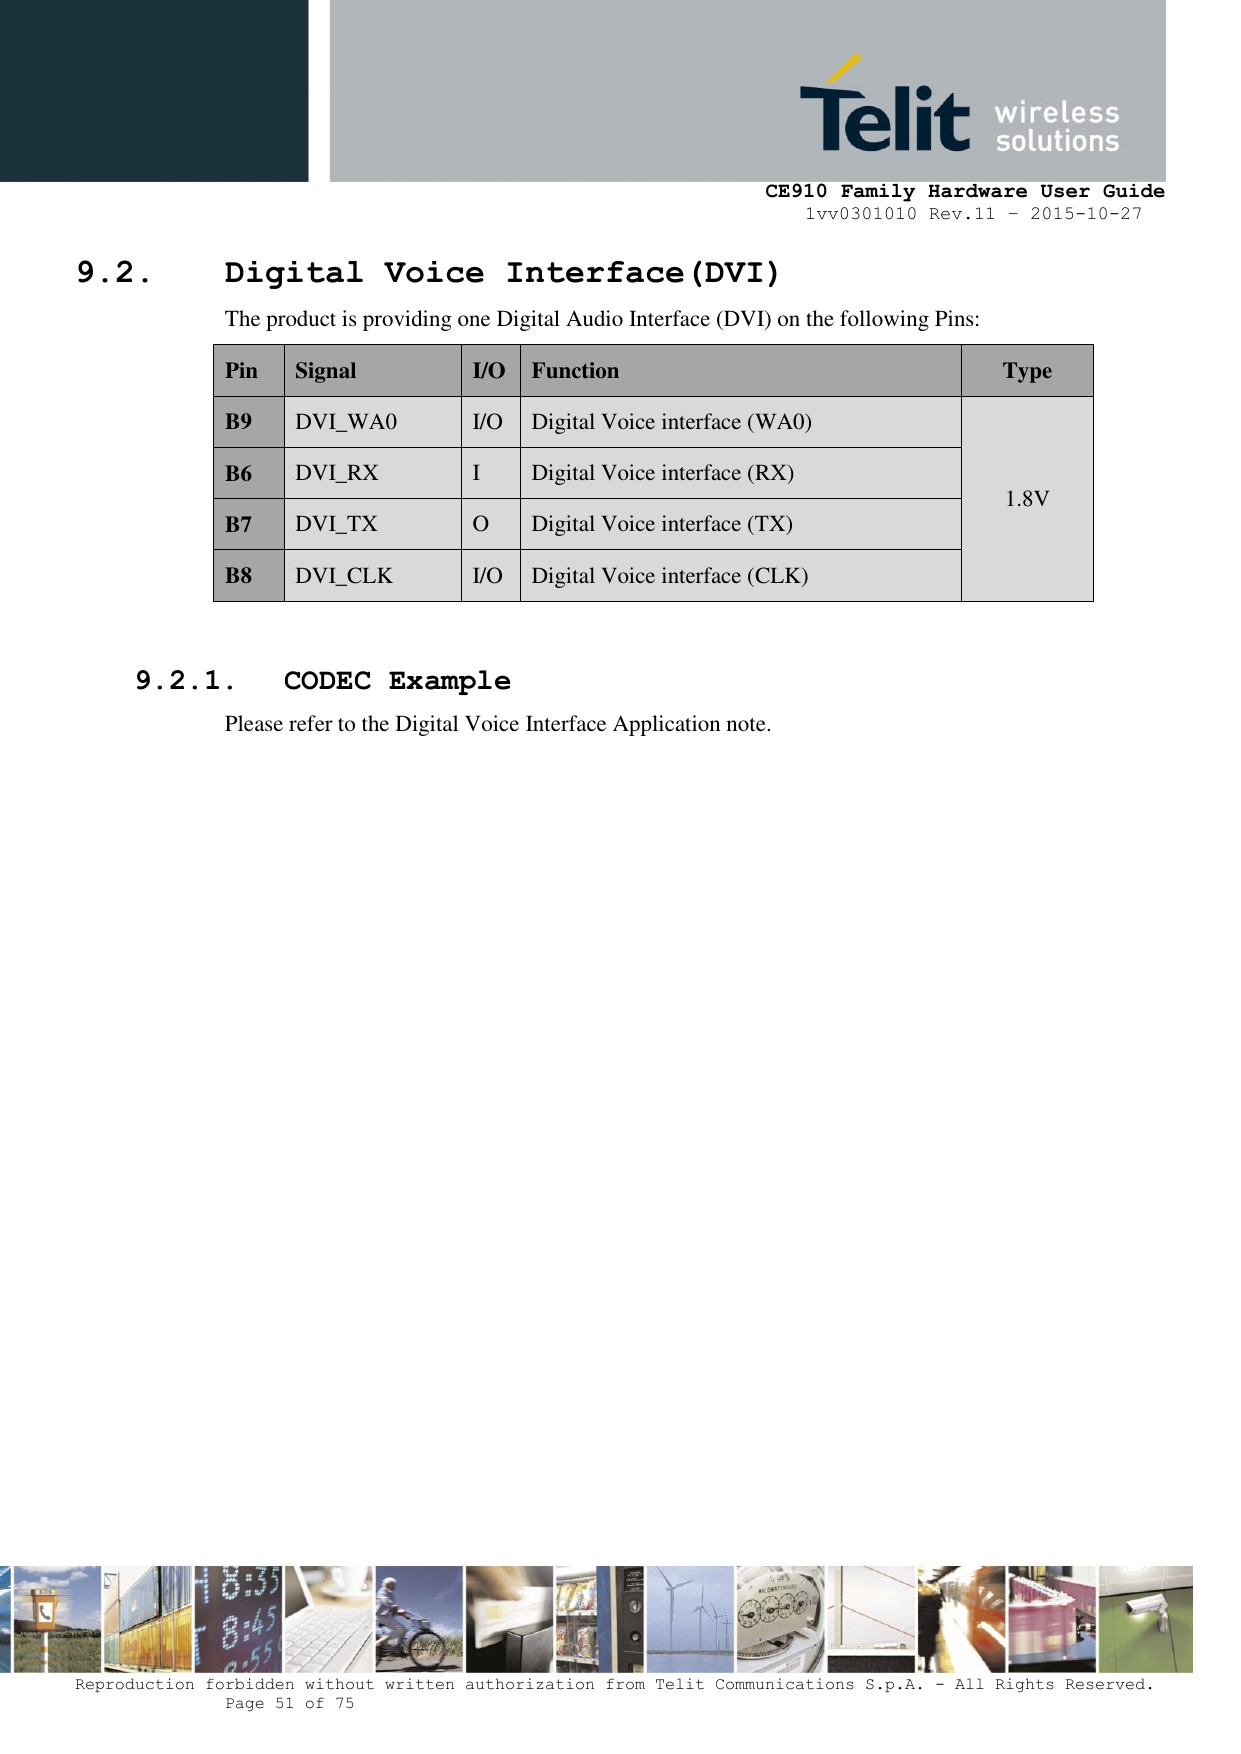     CE910 Family Hardware User Guide 1vv0301010 Rev.11 – 2015-10-27 Reproduction forbidden without written authorization from Telit Communications S.p.A. - All Rights Reserved.    Page 51 of 75                                                     9.2. Digital Voice Interface(DVI) The product is providing one Digital Audio Interface (DVI) on the following Pins: Pin Signal I/O Function Type B9 DVI_WA0 I/O Digital Voice interface (WA0) 1.8V B6 DVI_RX I Digital Voice interface (RX) B7 DVI_TX O Digital Voice interface (TX) B8 DVI_CLK I/O Digital Voice interface (CLK)  9.2.1. CODEC Example Please refer to the Digital Voice Interface Application note.    